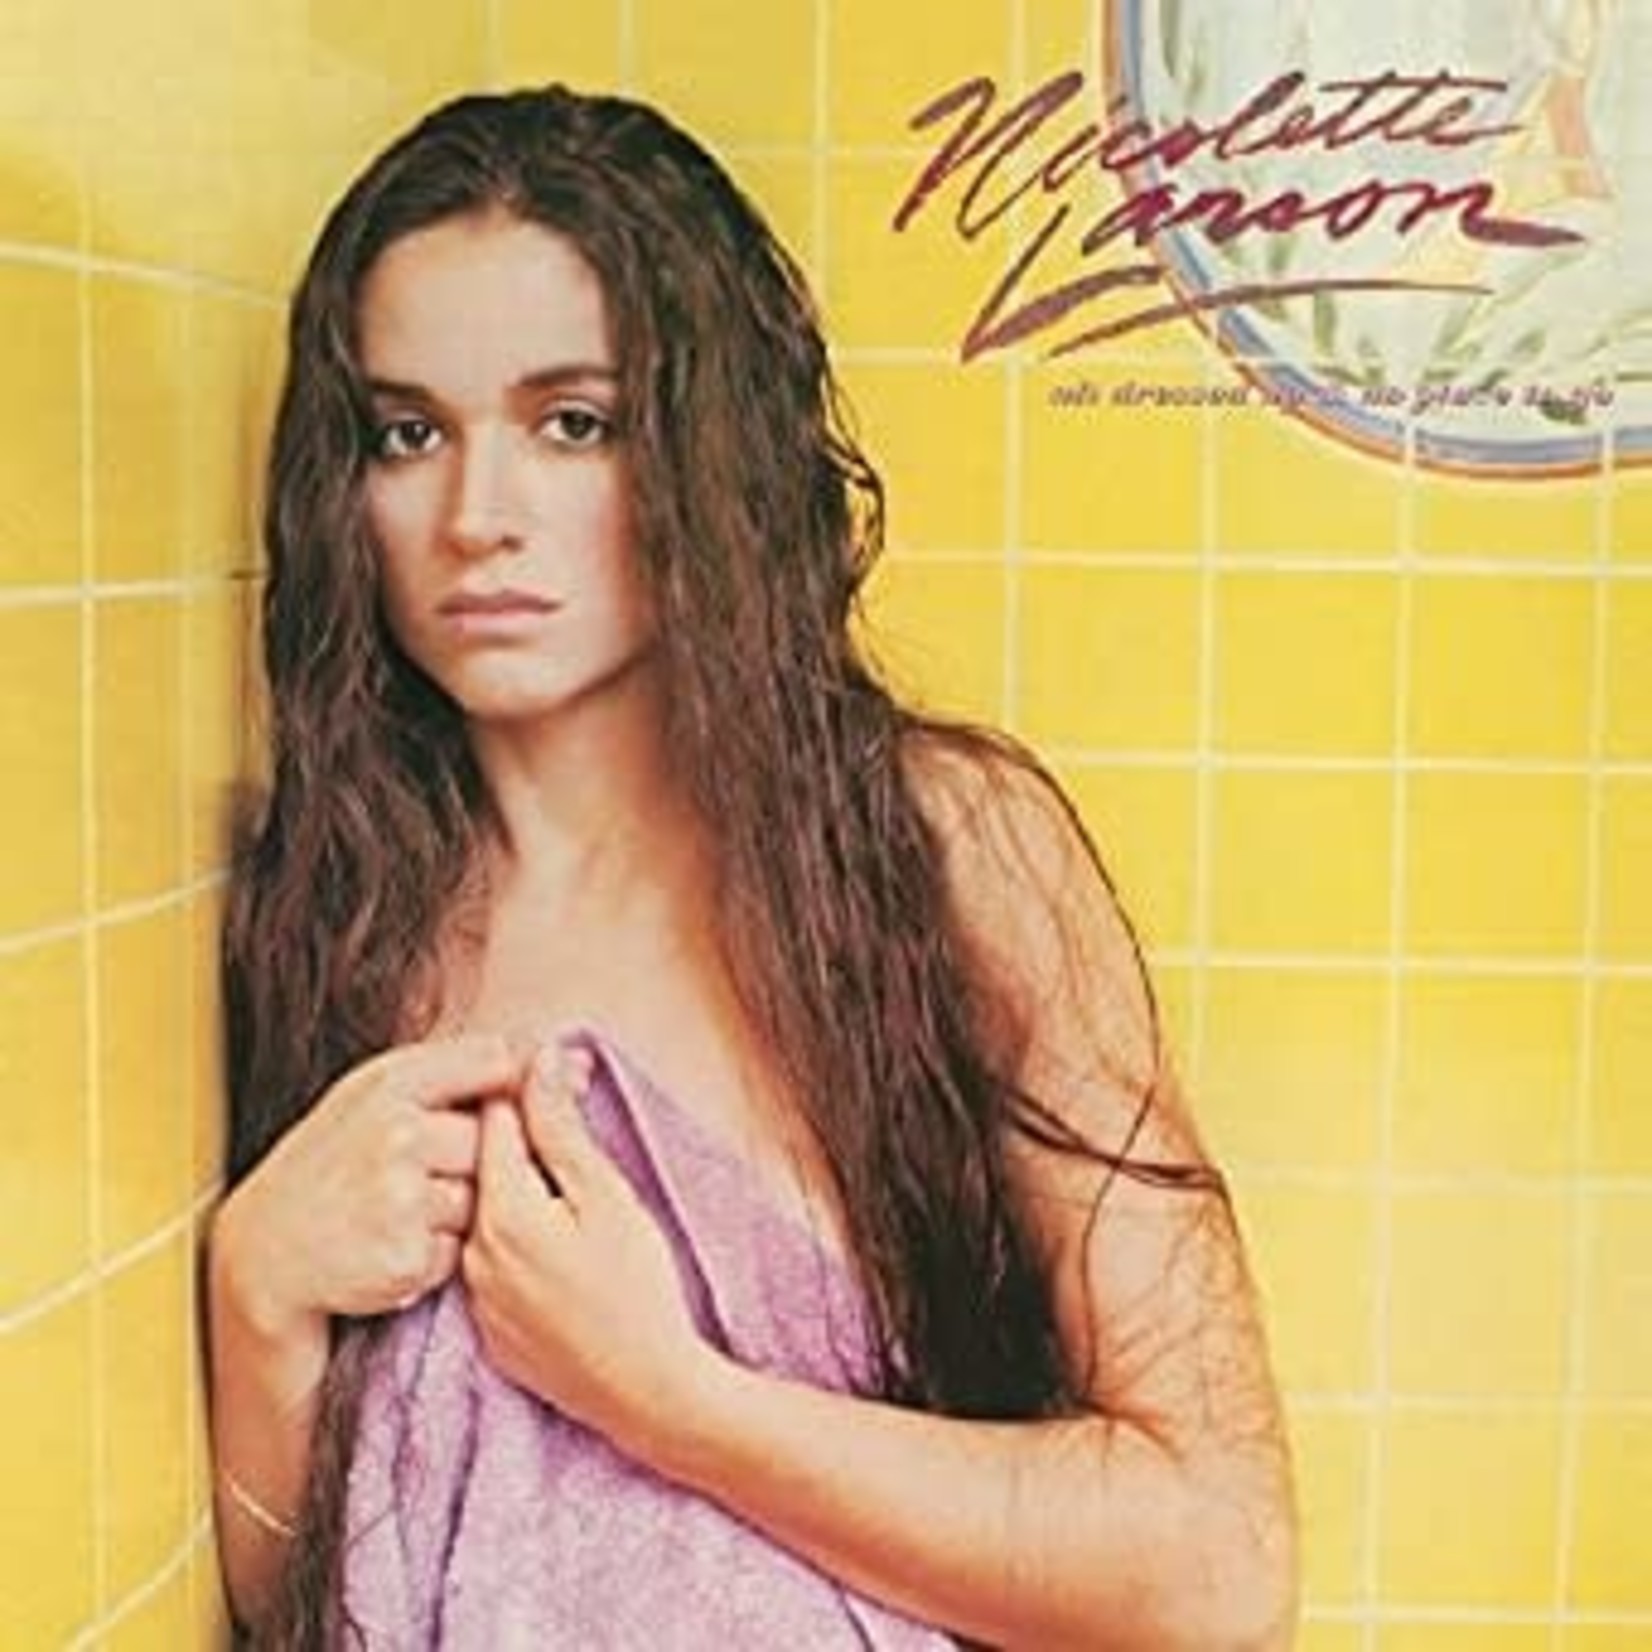 [Vintage] Nicolette Larson - All Dressed Up & No Place to Go